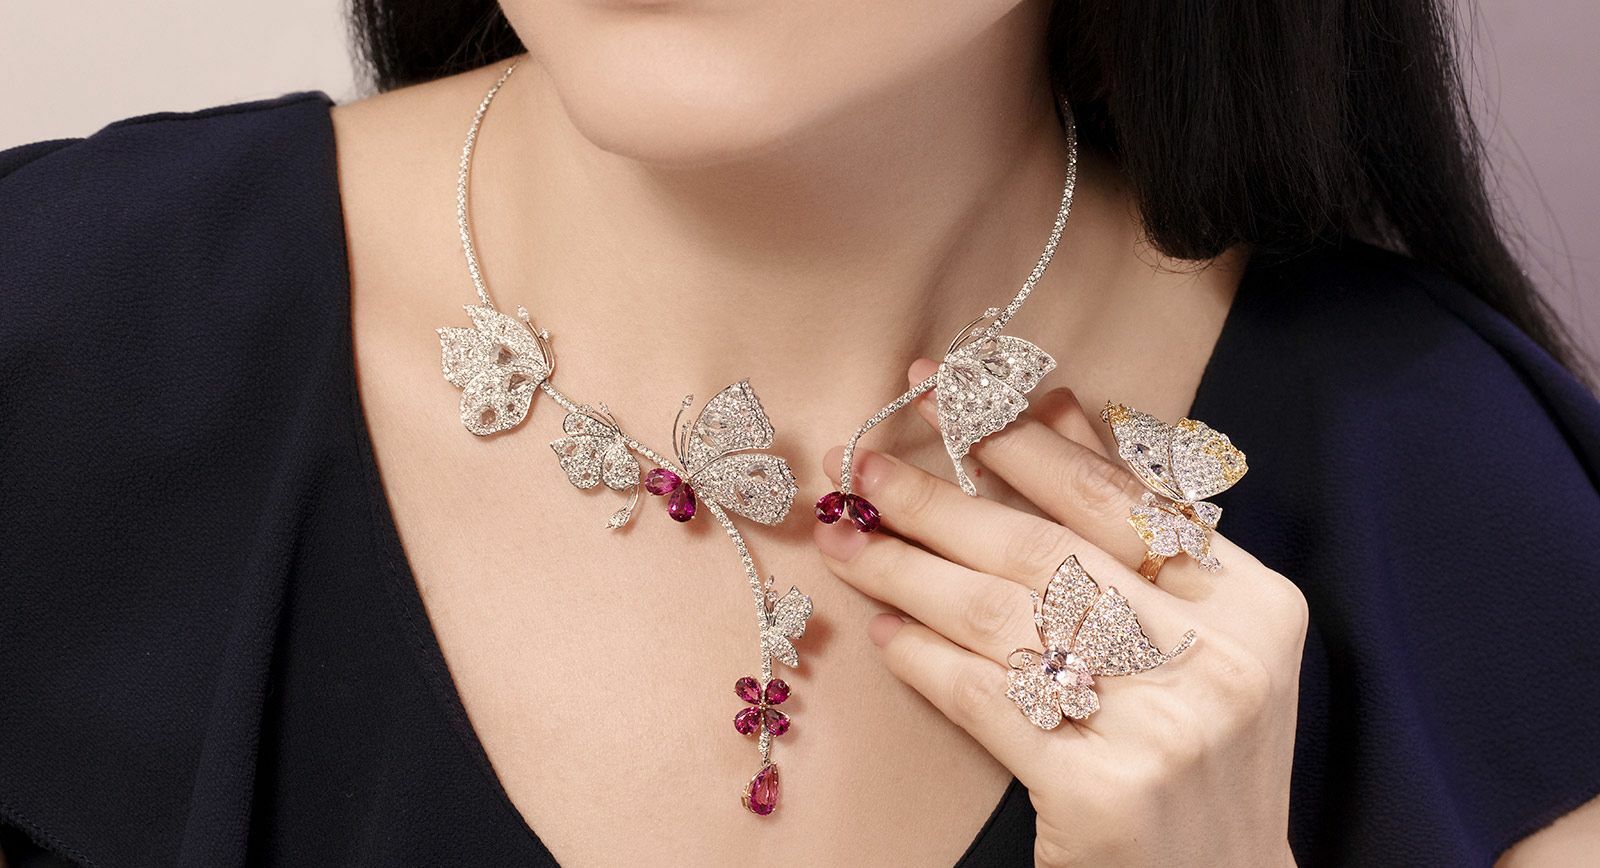 Jessica Fong: The jewellery designer's fascination with butterflies